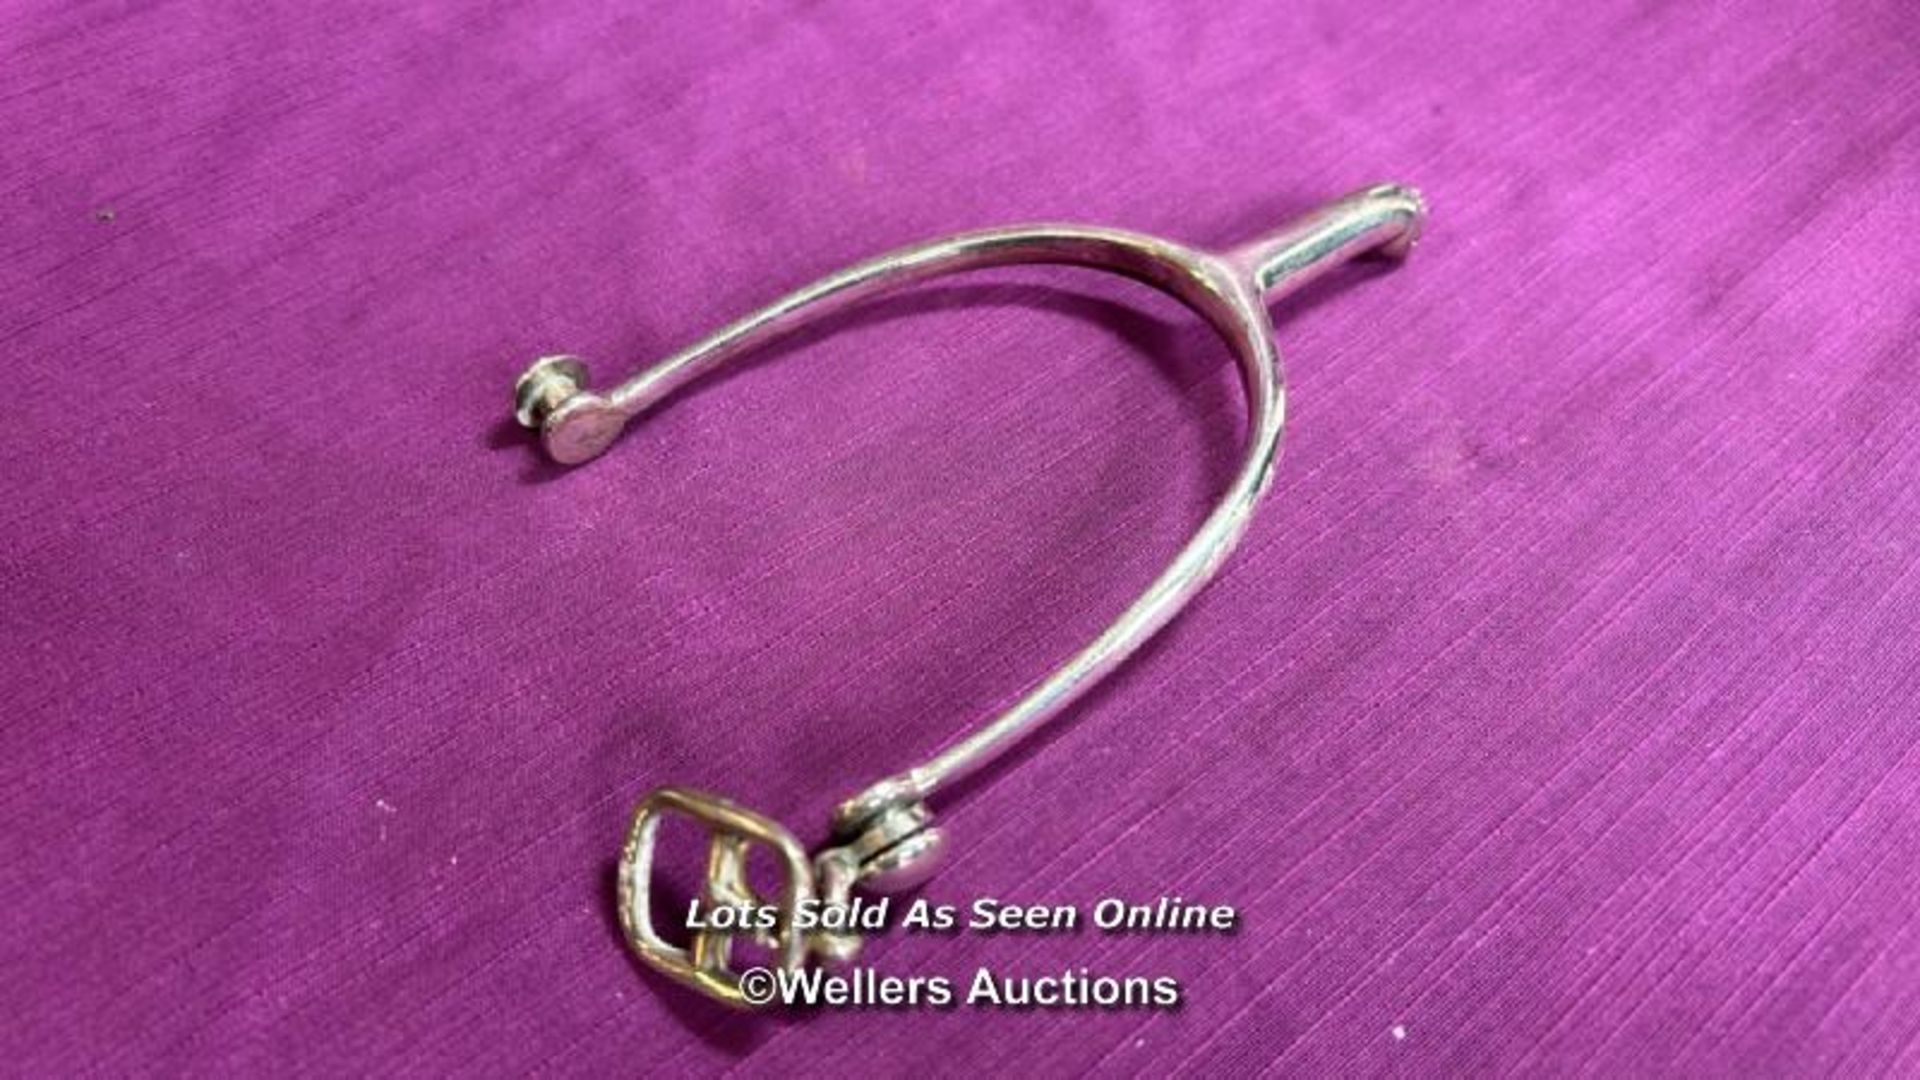 HALLMARKED SILVER SPUR AND BUCKLE, DATED 1895, WITH INSCRIPTION, LENGTH 14CM, WEIGHT 94GMS - Image 2 of 6